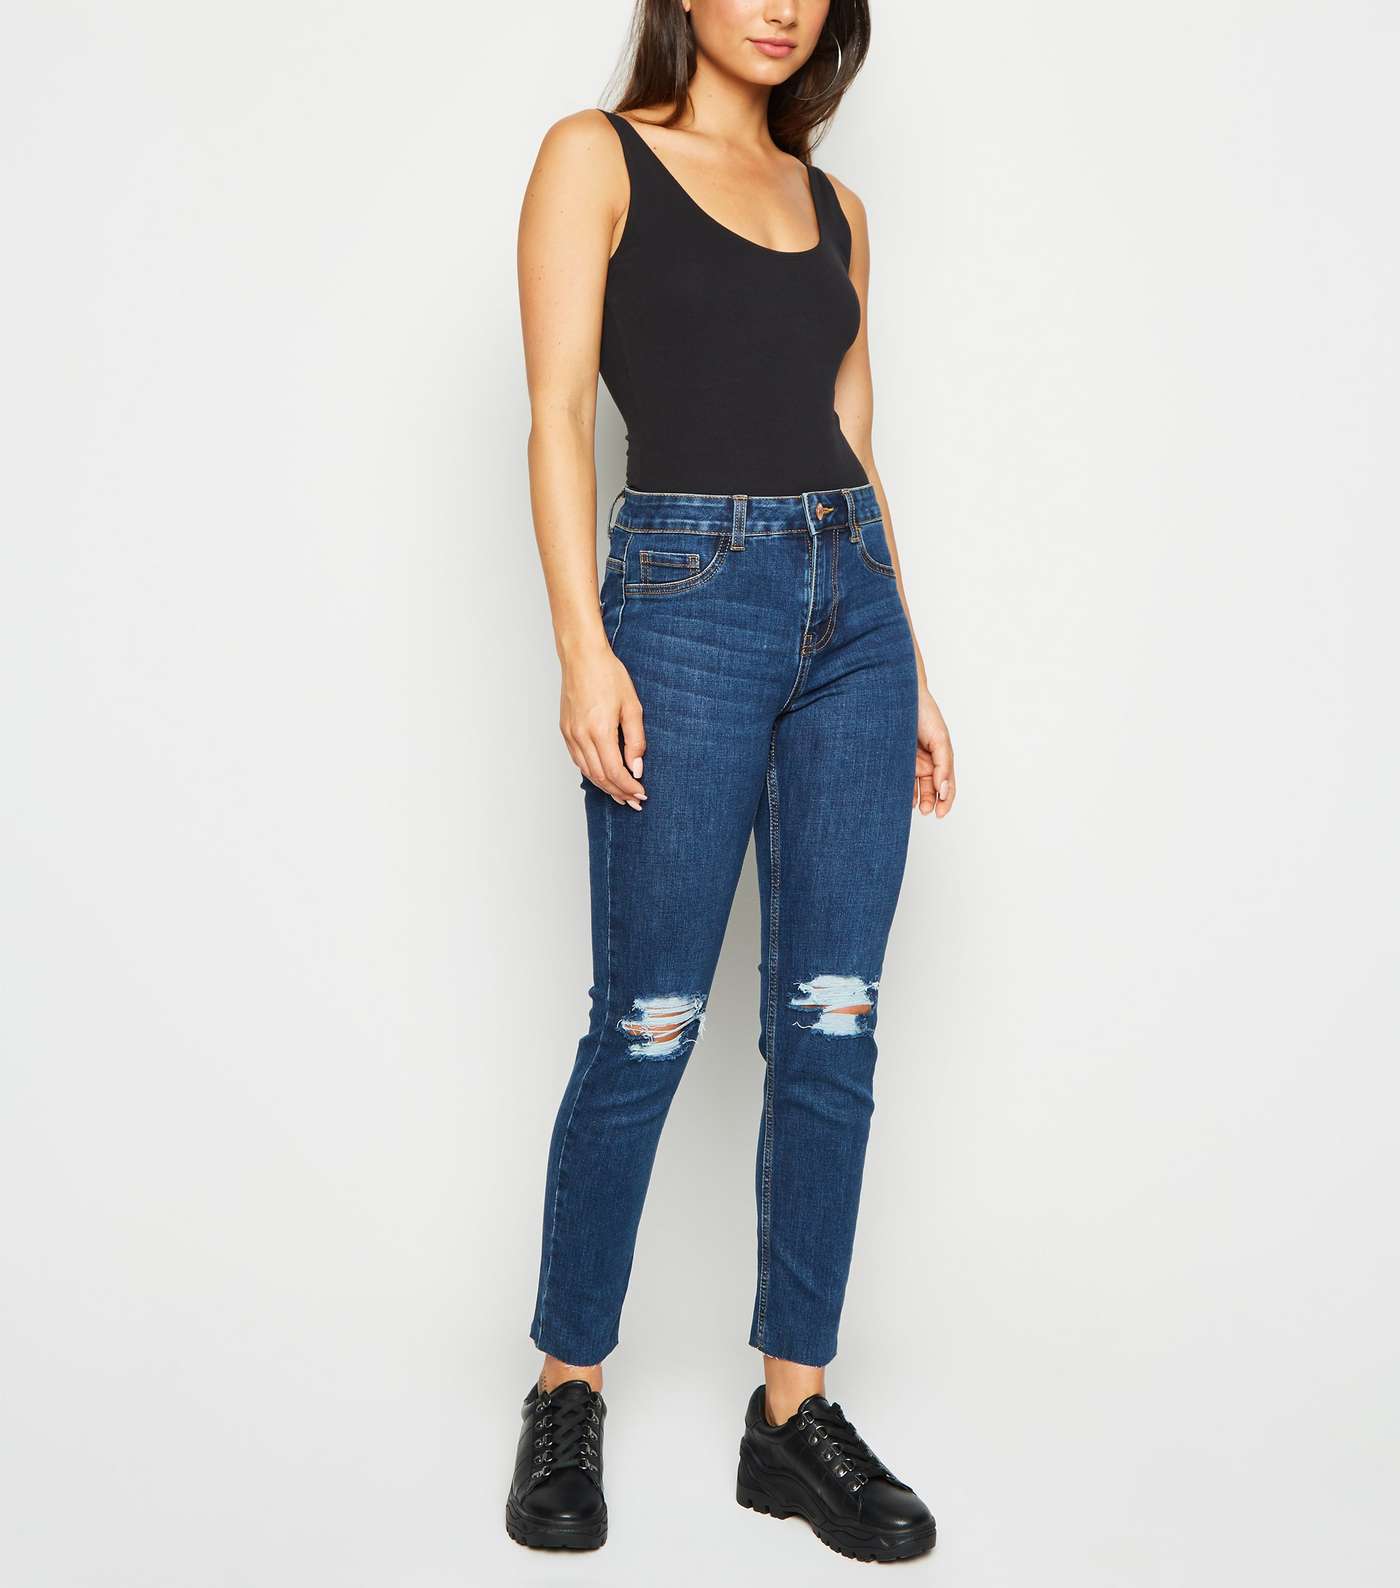 Petite Blue Rinse Wash Ripped Skinny Jeans